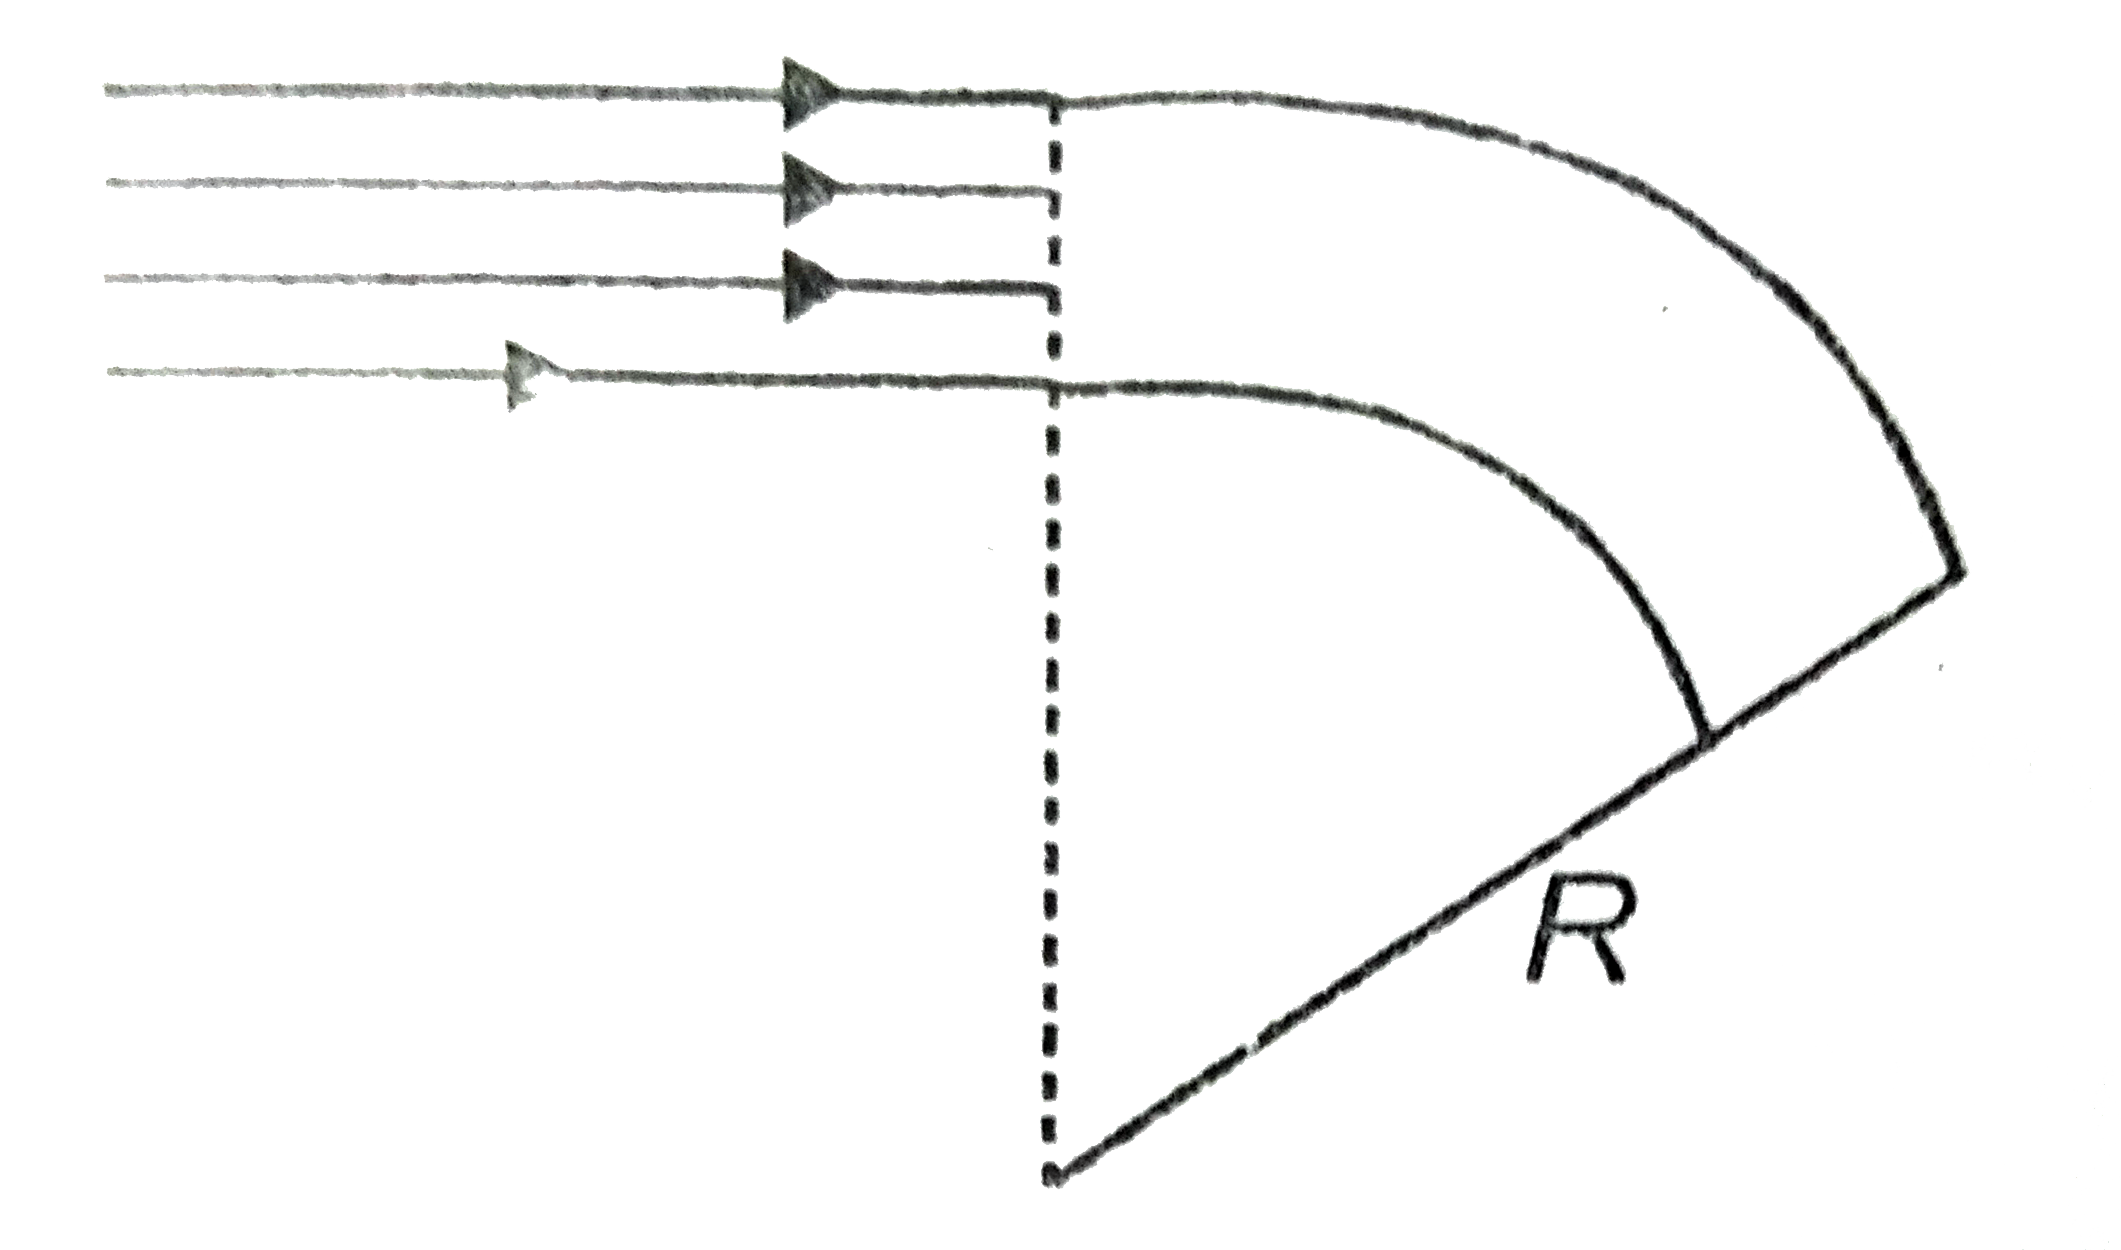 A portion of a straight glass rod of diameter 2 cm and refractive index 1.5 is bent into an arc of a circle of radius R cm and a parallel beam of light is incident on it as shown in figure. Find the smallest R which permits all the light to pass around the arc.